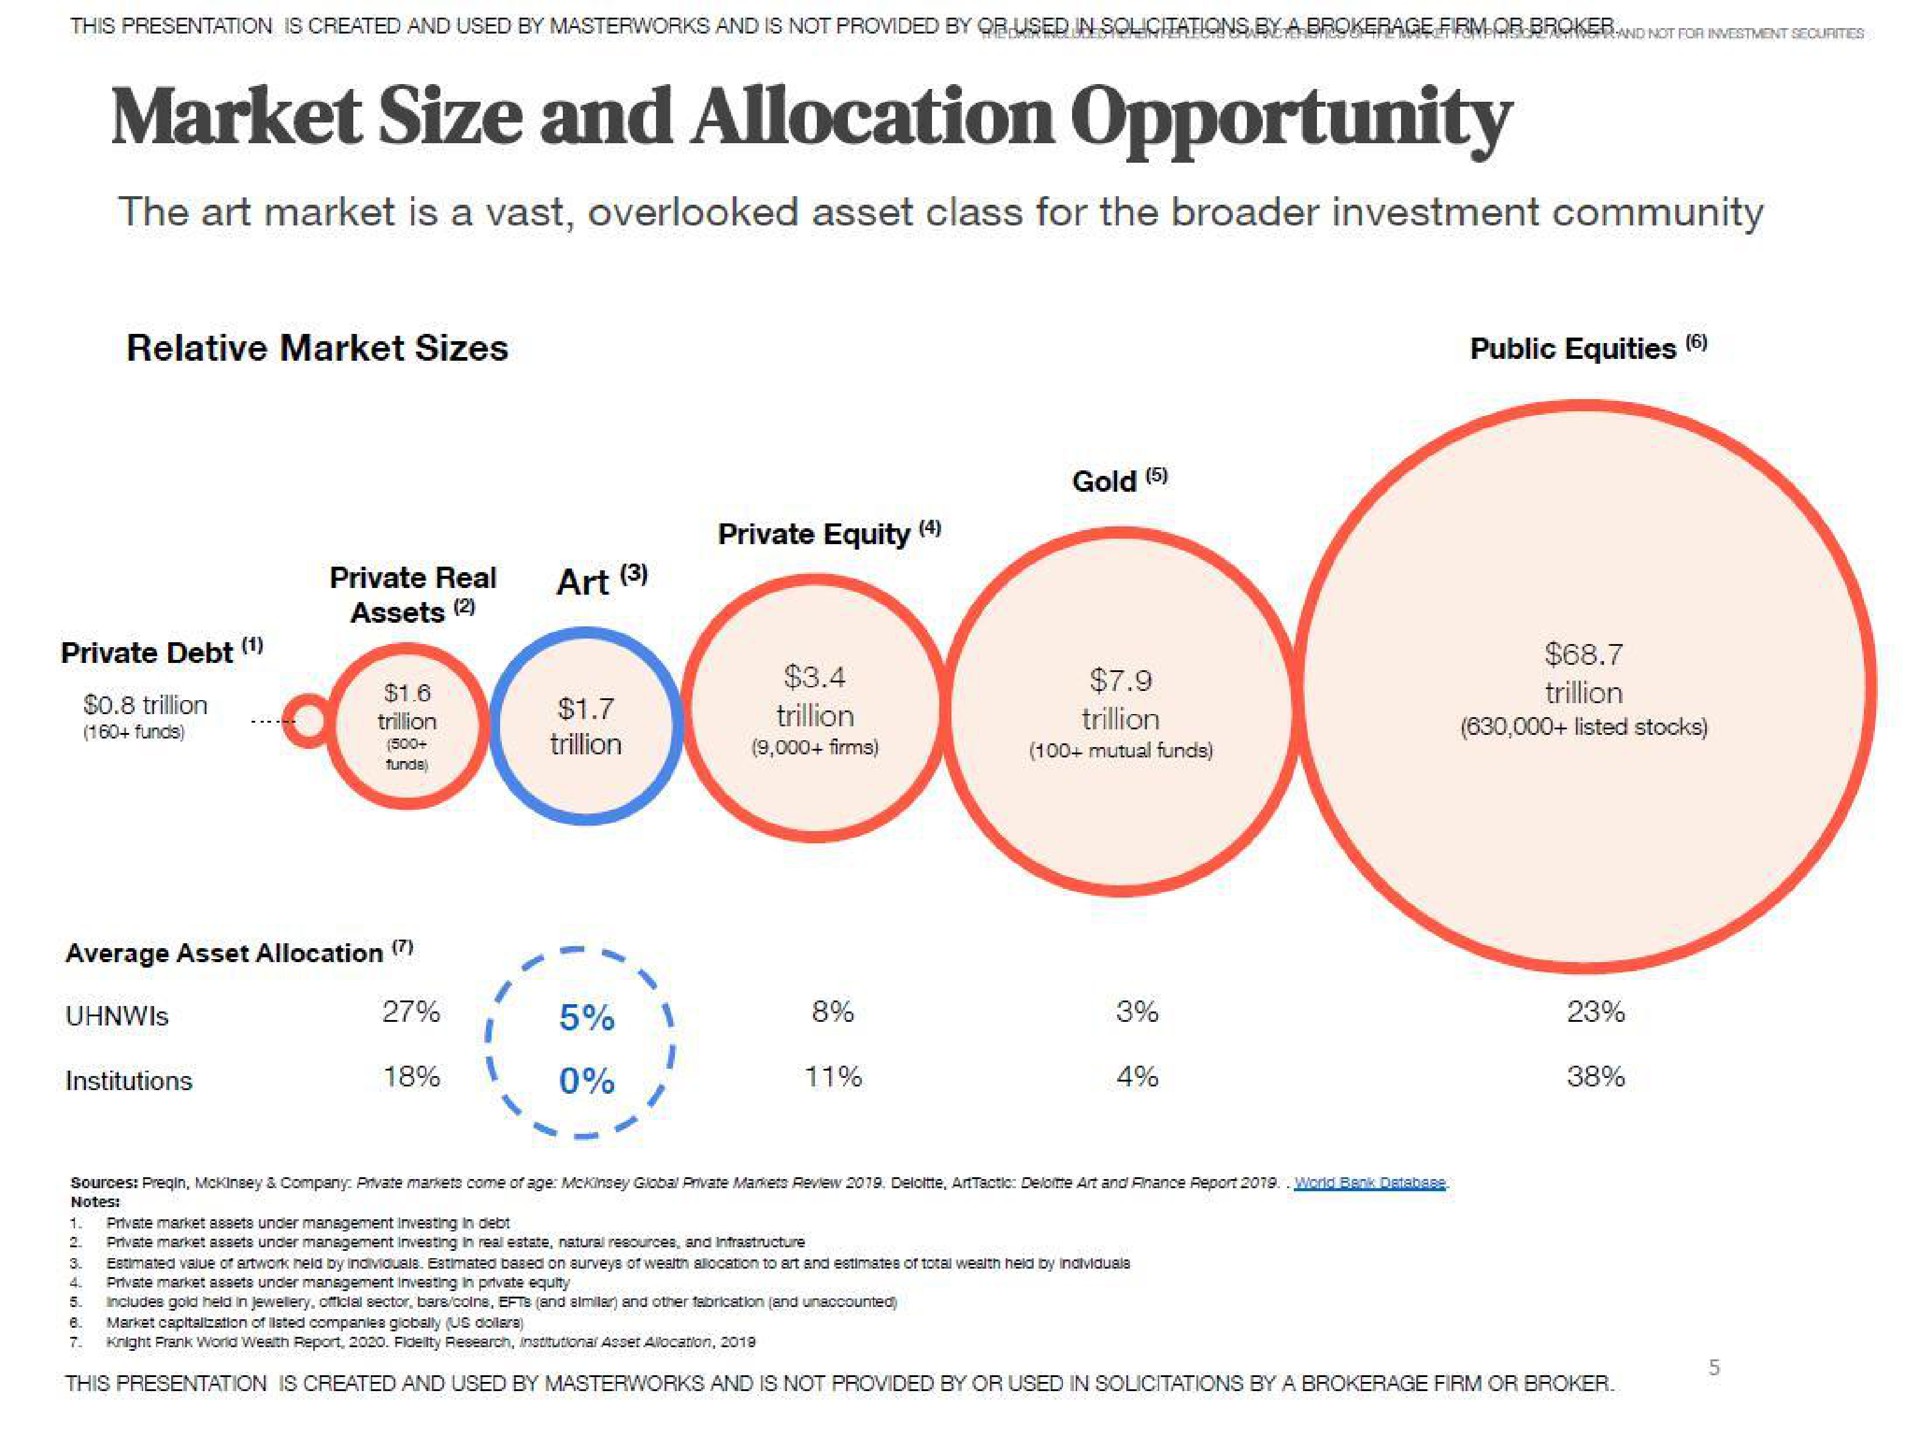 market size and allocation opportunity the art market is a vast overlooked asset class for the investment community far trillion trillion trillion listed stocks institutions | Masterworks